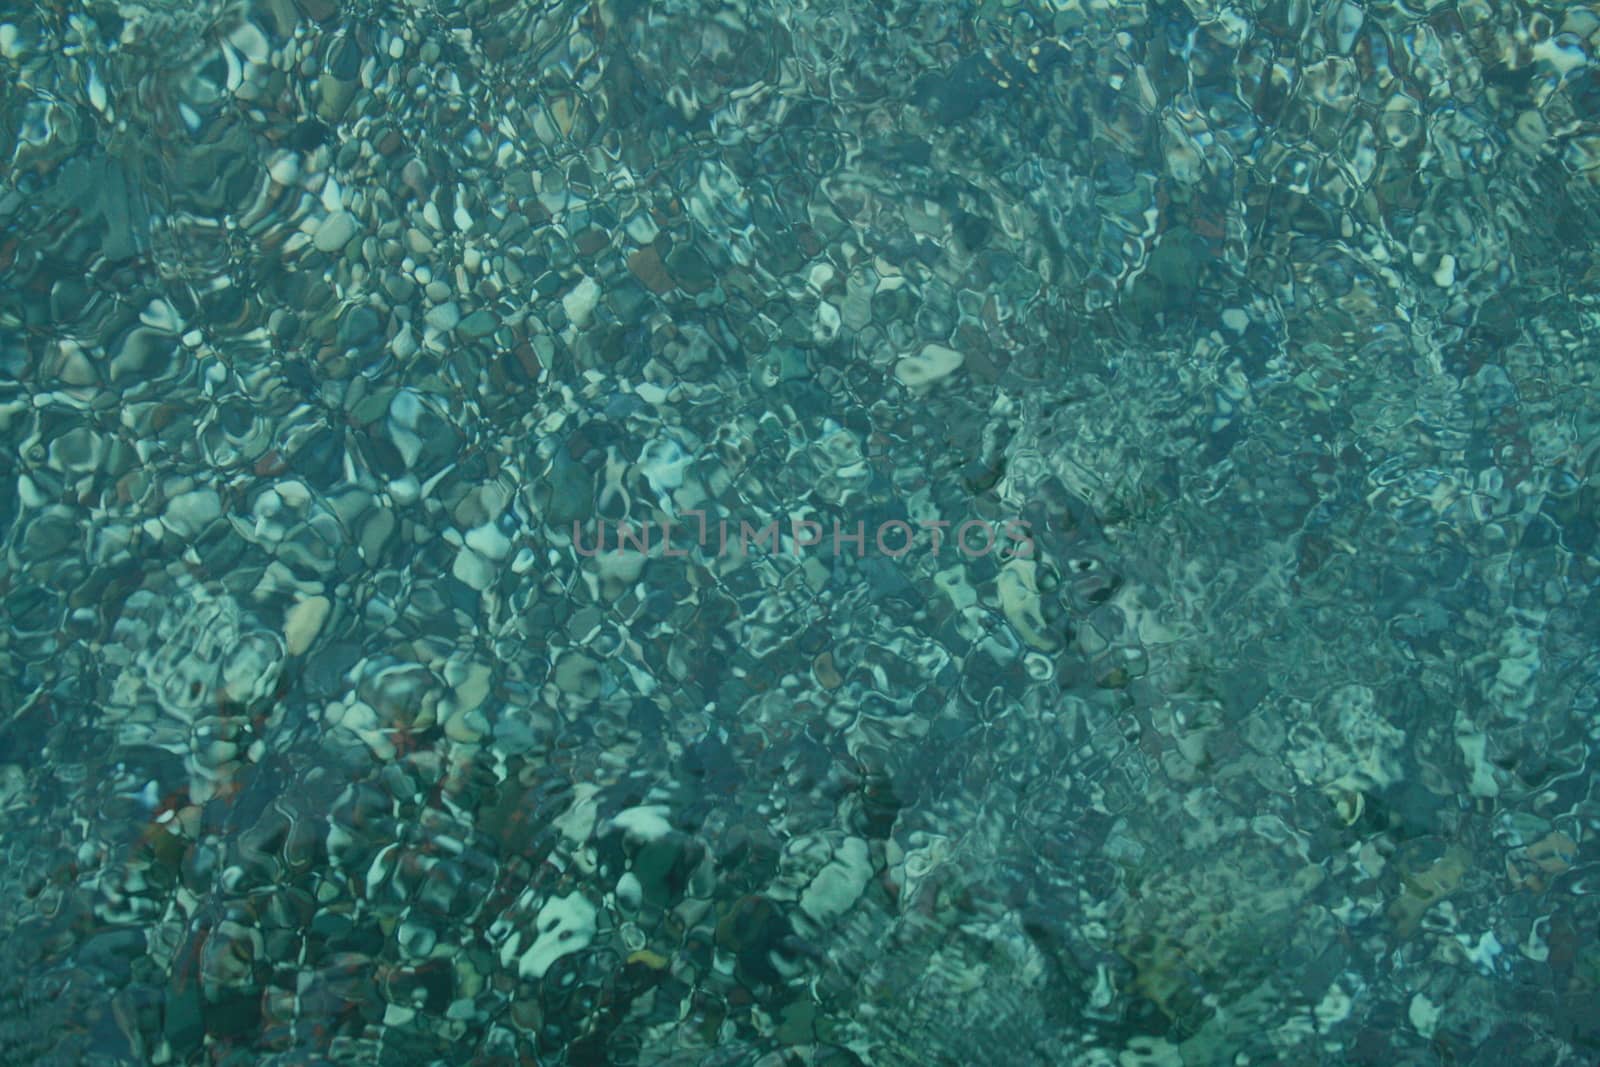 the small round Stones in the crystal clear water